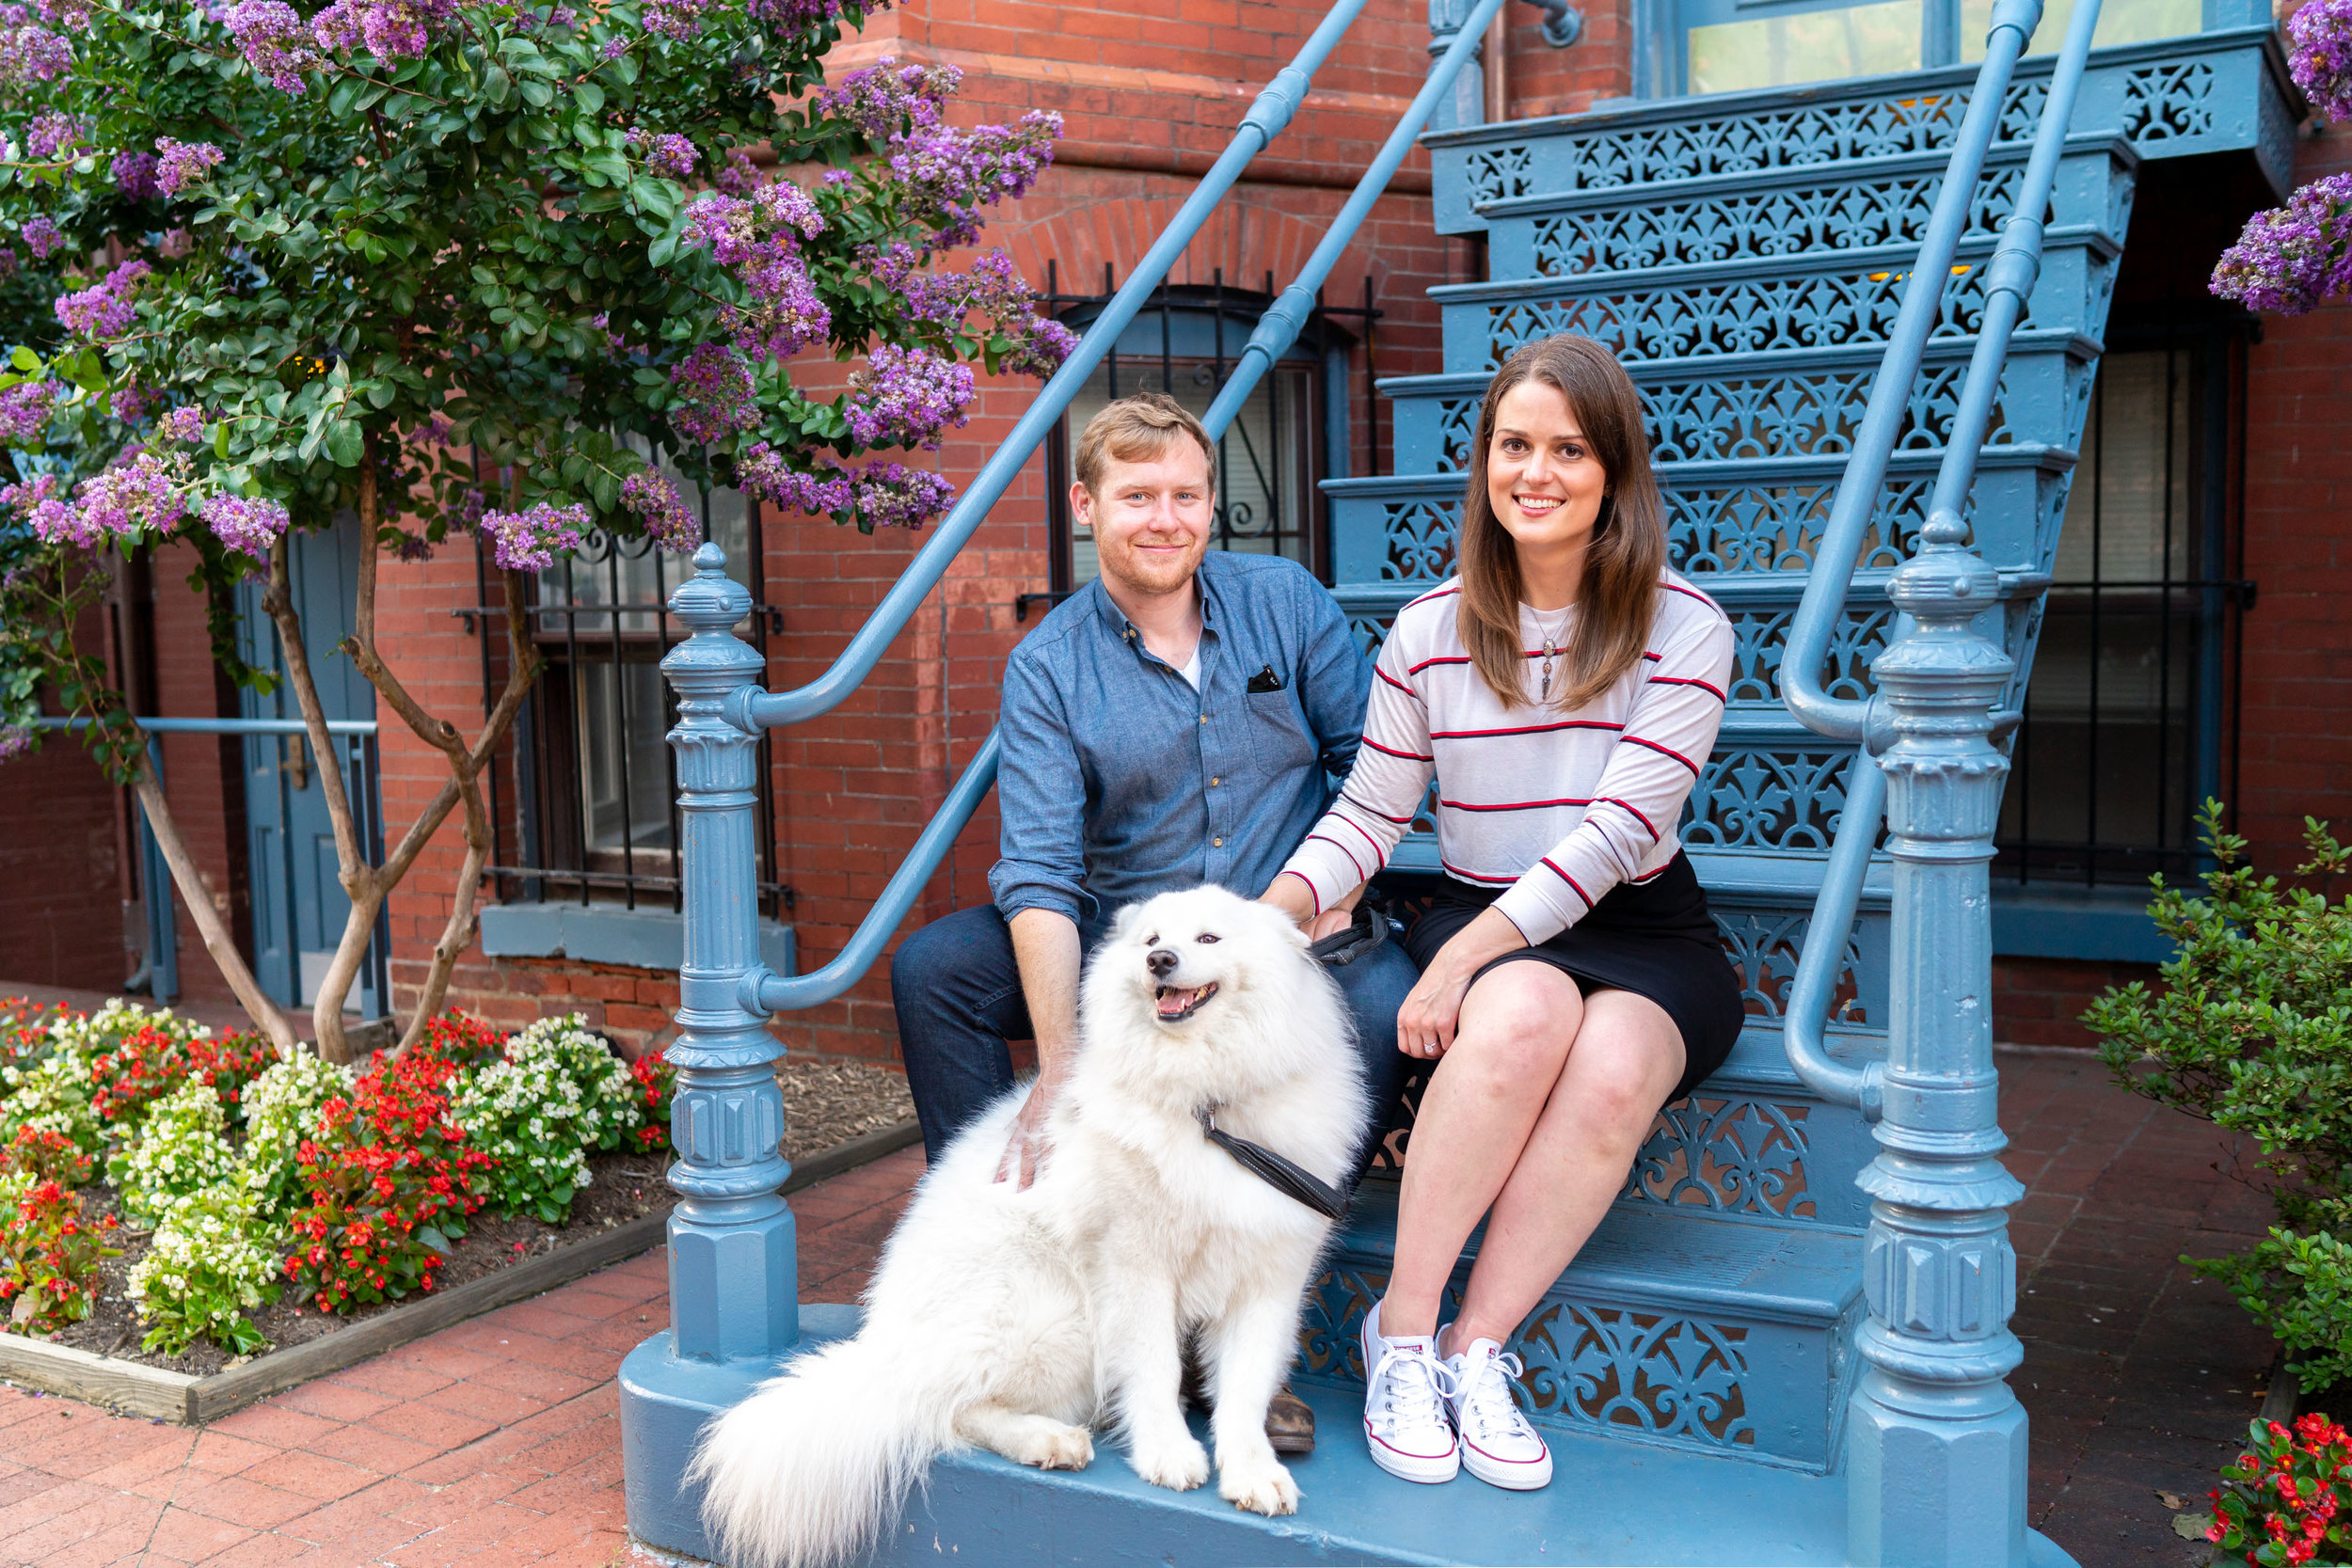 DC blue door and staircase engagement photo ideas